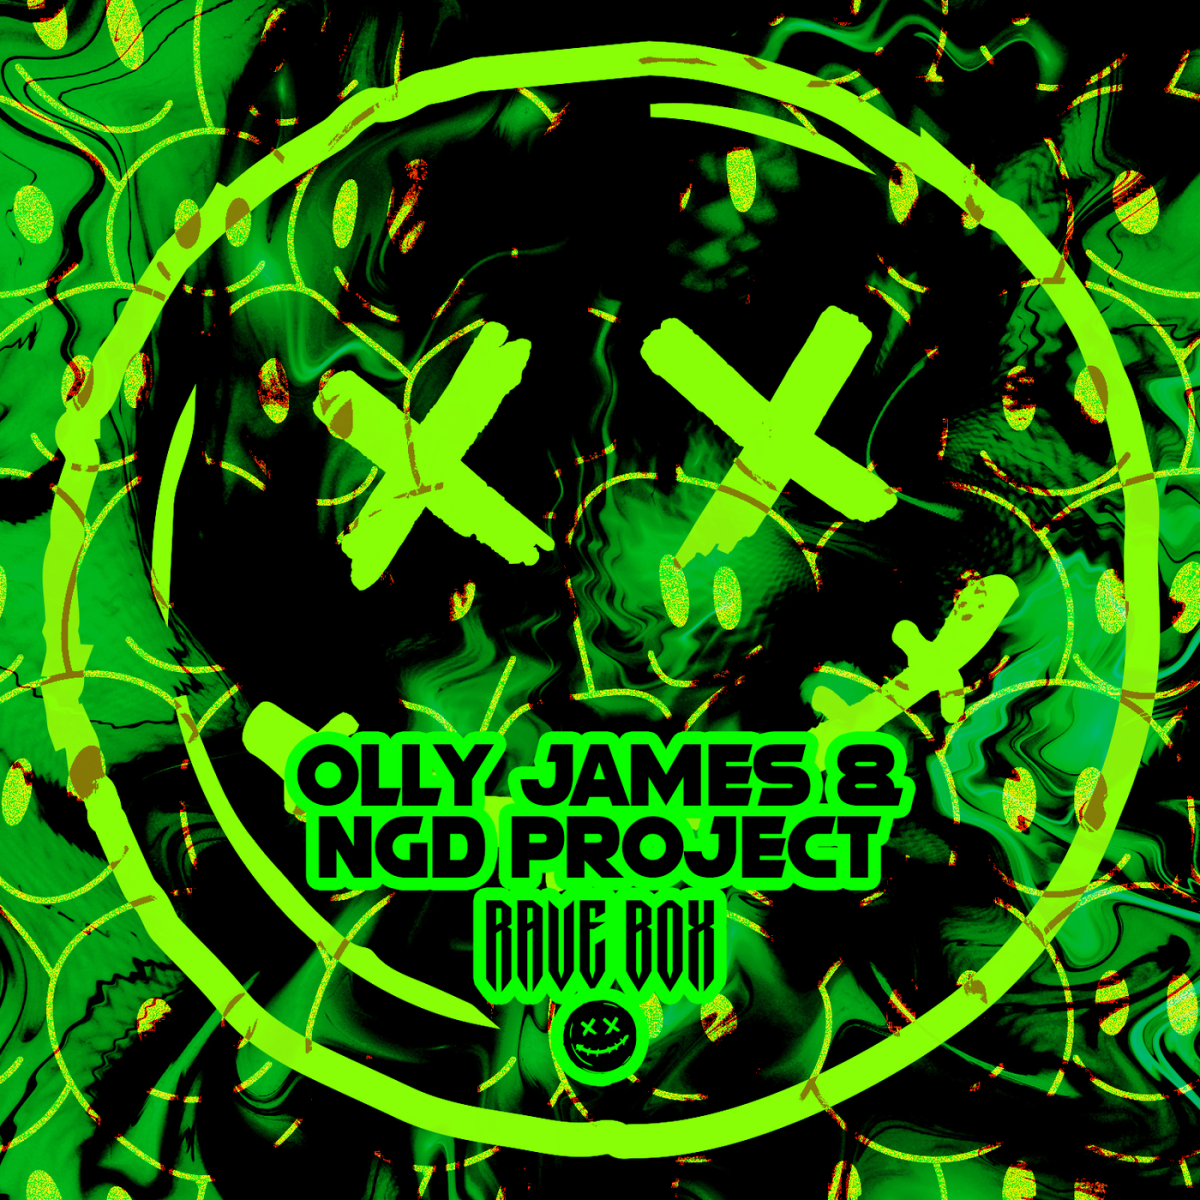 Rave Box - Olly James⁠ & NGD Project⁠ 